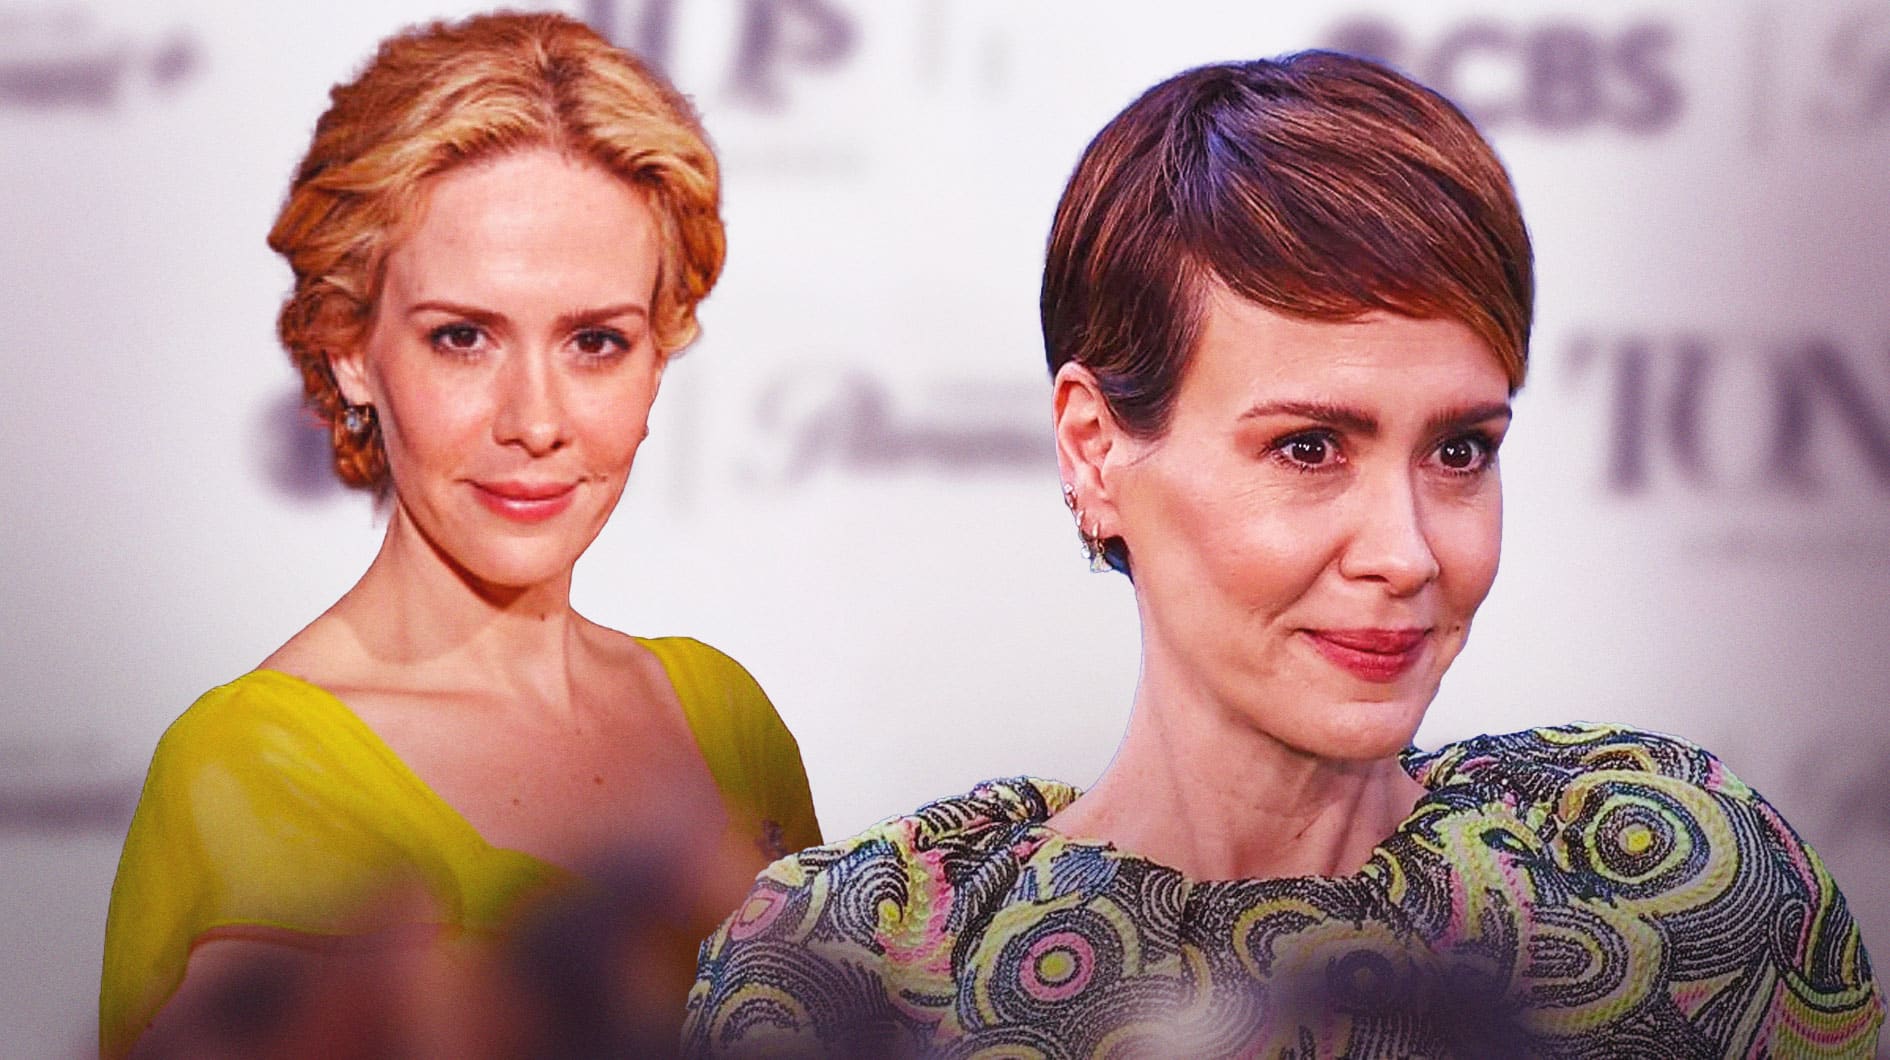 Sarah Paulson breaks silence on actress who gave 6 pages of unwarranted feedback